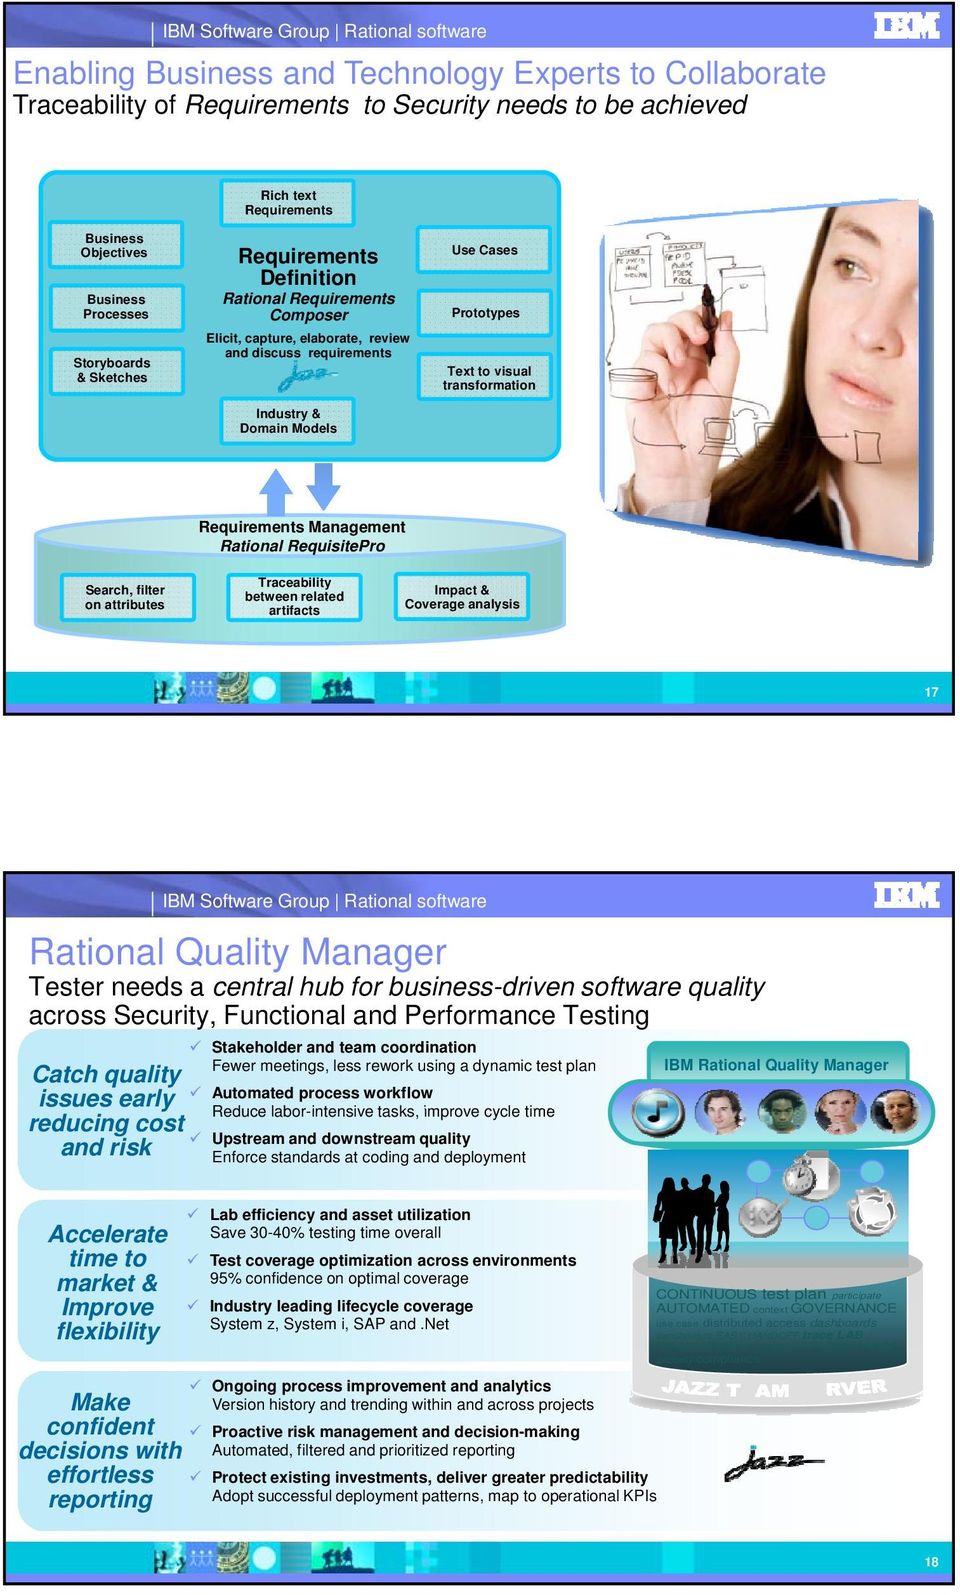 transformation Requirements Management RequisitePro Search, filter on attributes Traceability between related artifacts Impact & Coverage analysis 17 IBM Software Group software Quality Manager